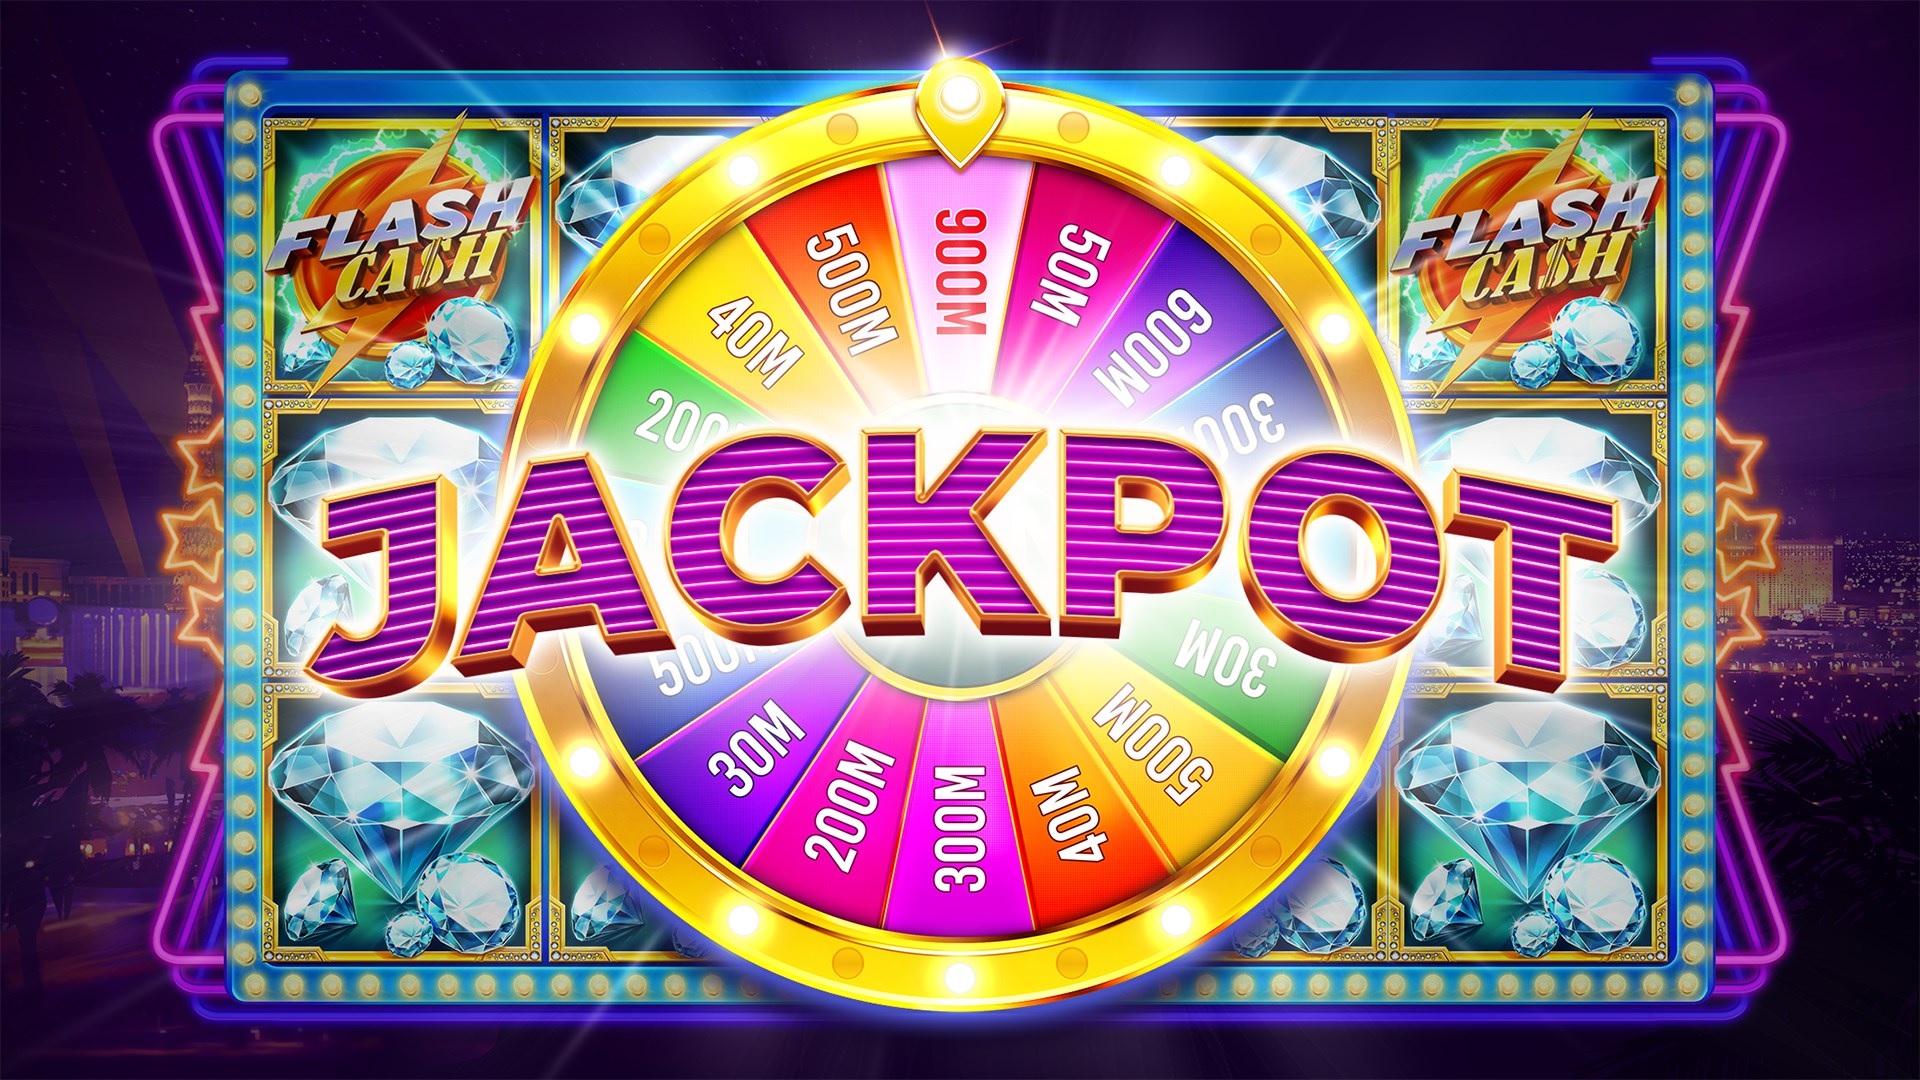 software used to create online slot machines